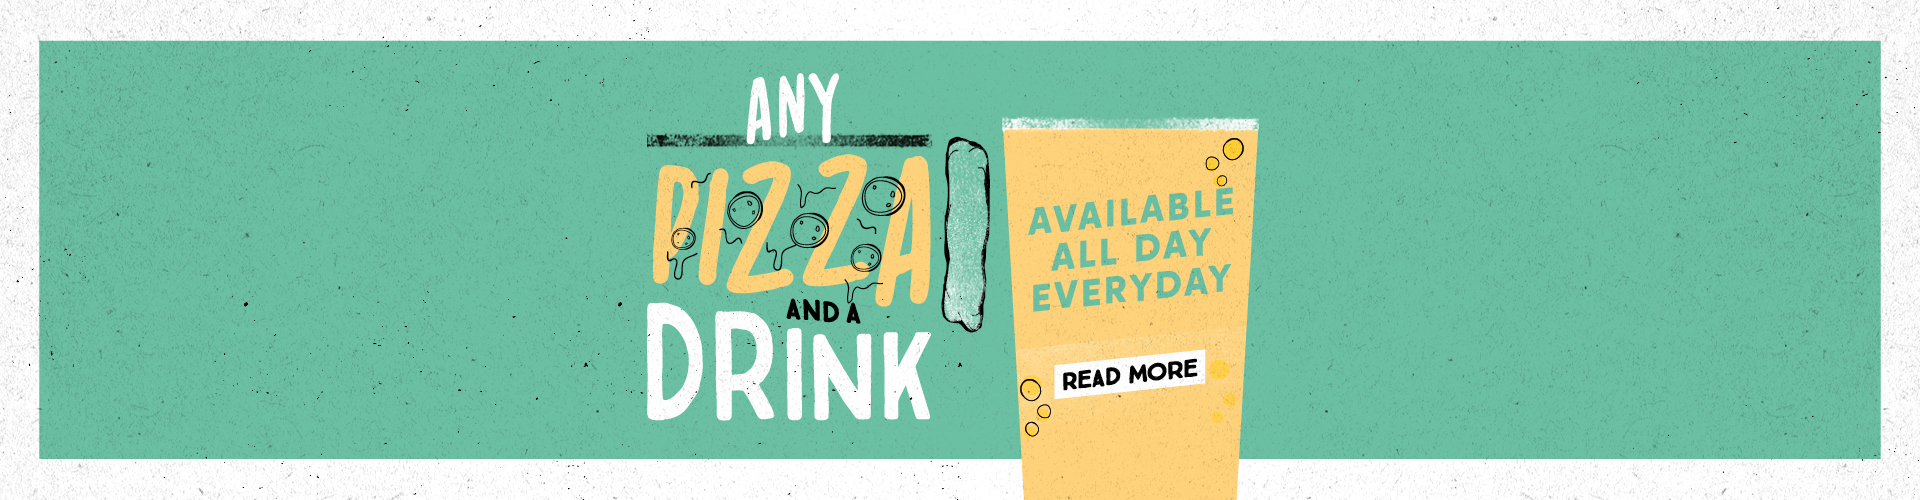 Any pizza and a drink - available all day every day. Read More.